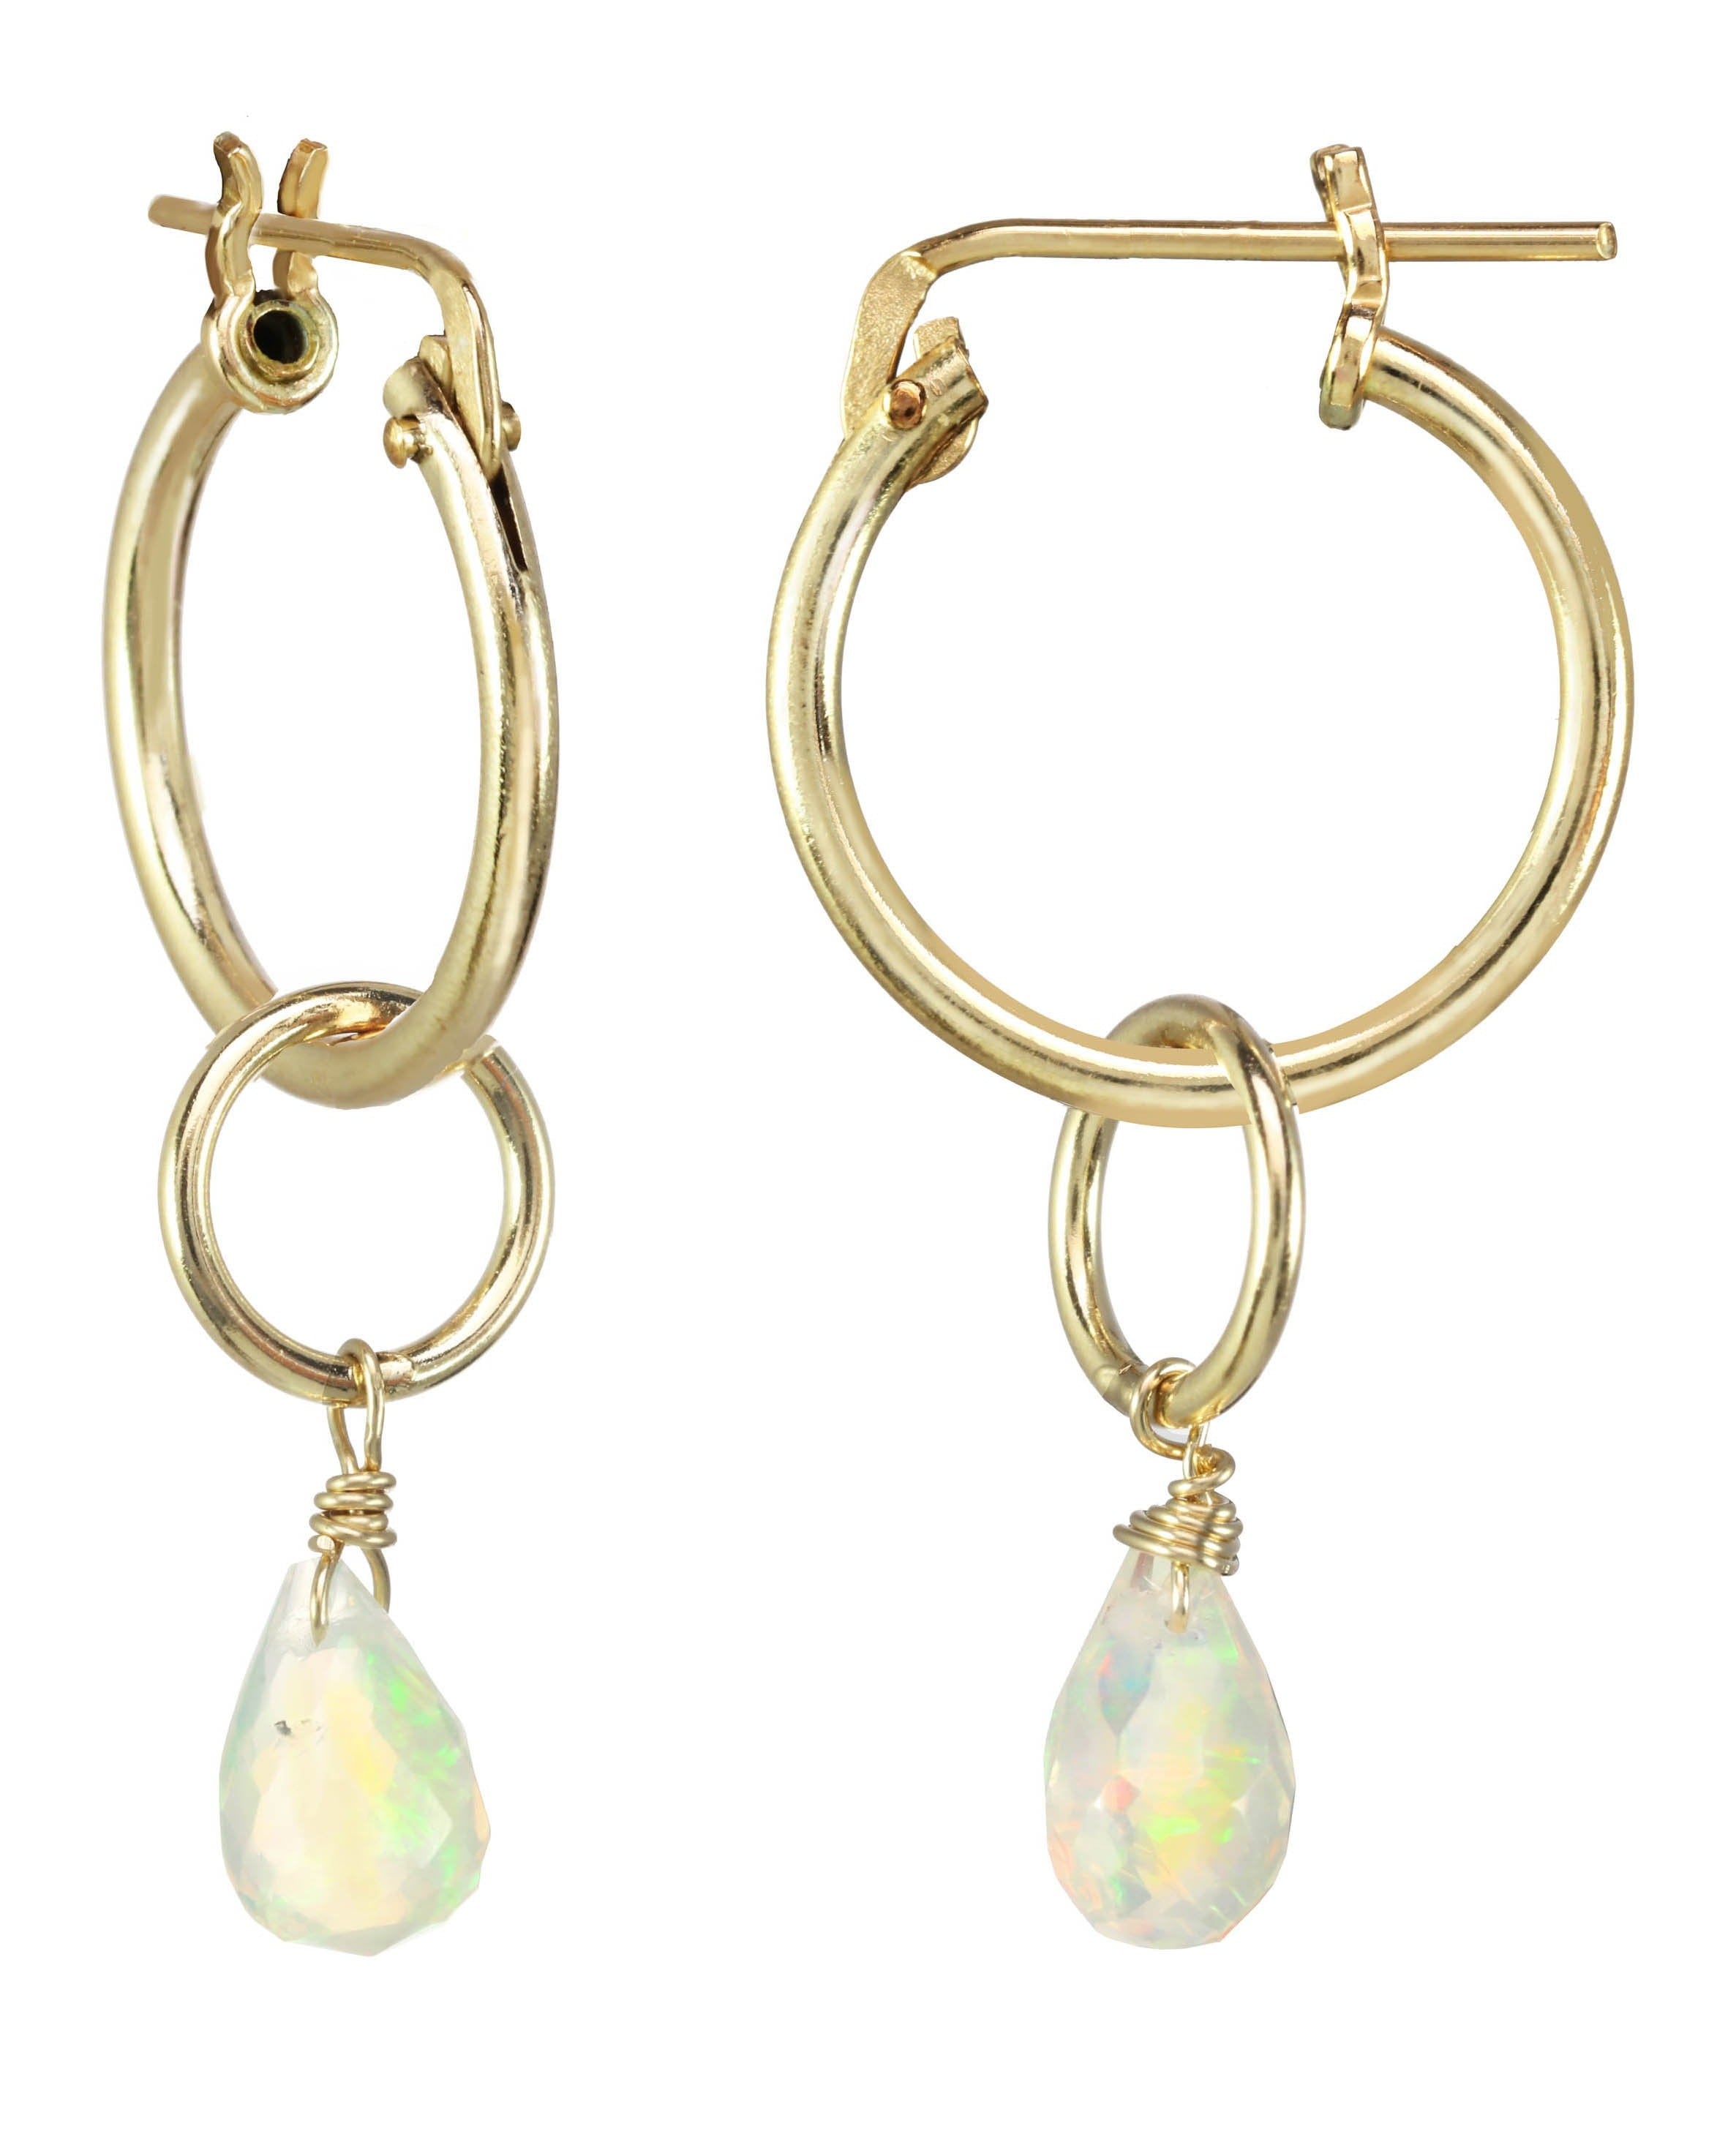 Olivia Earrings by KOZAKH. 15mm snap closure hoop earrings in 14K Gold Filled, featuring a 5mm to 7mm Ethiopian Opal faceted droplet.